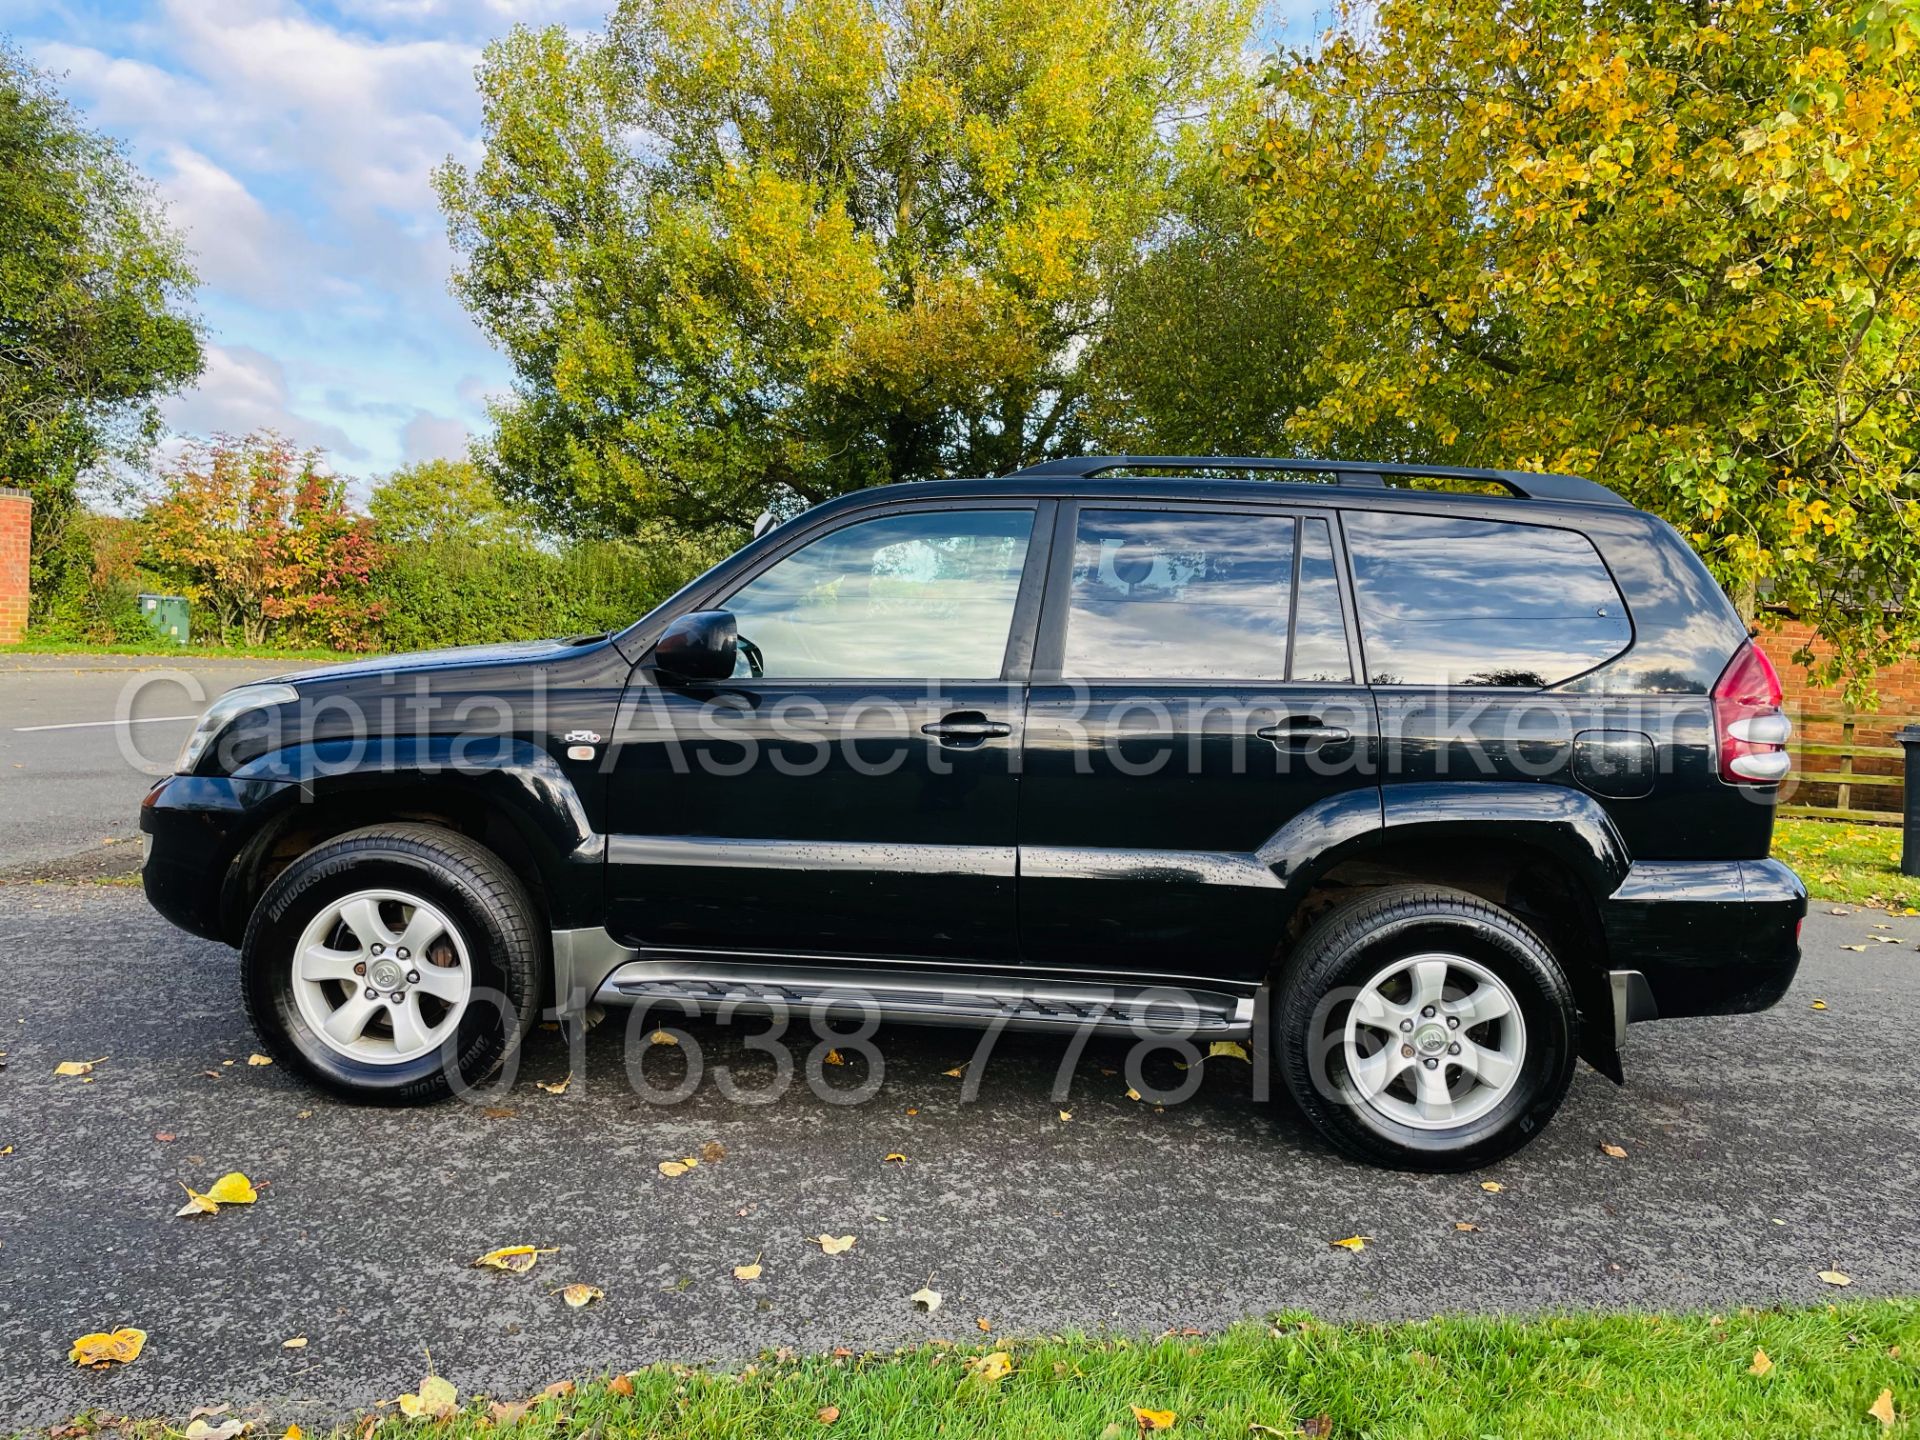 TOYOTA LAND CRUISER *INVINCIBLE* 7 SEATER SUV (2008) '3.0 D-4D - AUTO' *LEATHER & NAV* (1 OWNER) - Image 4 of 62